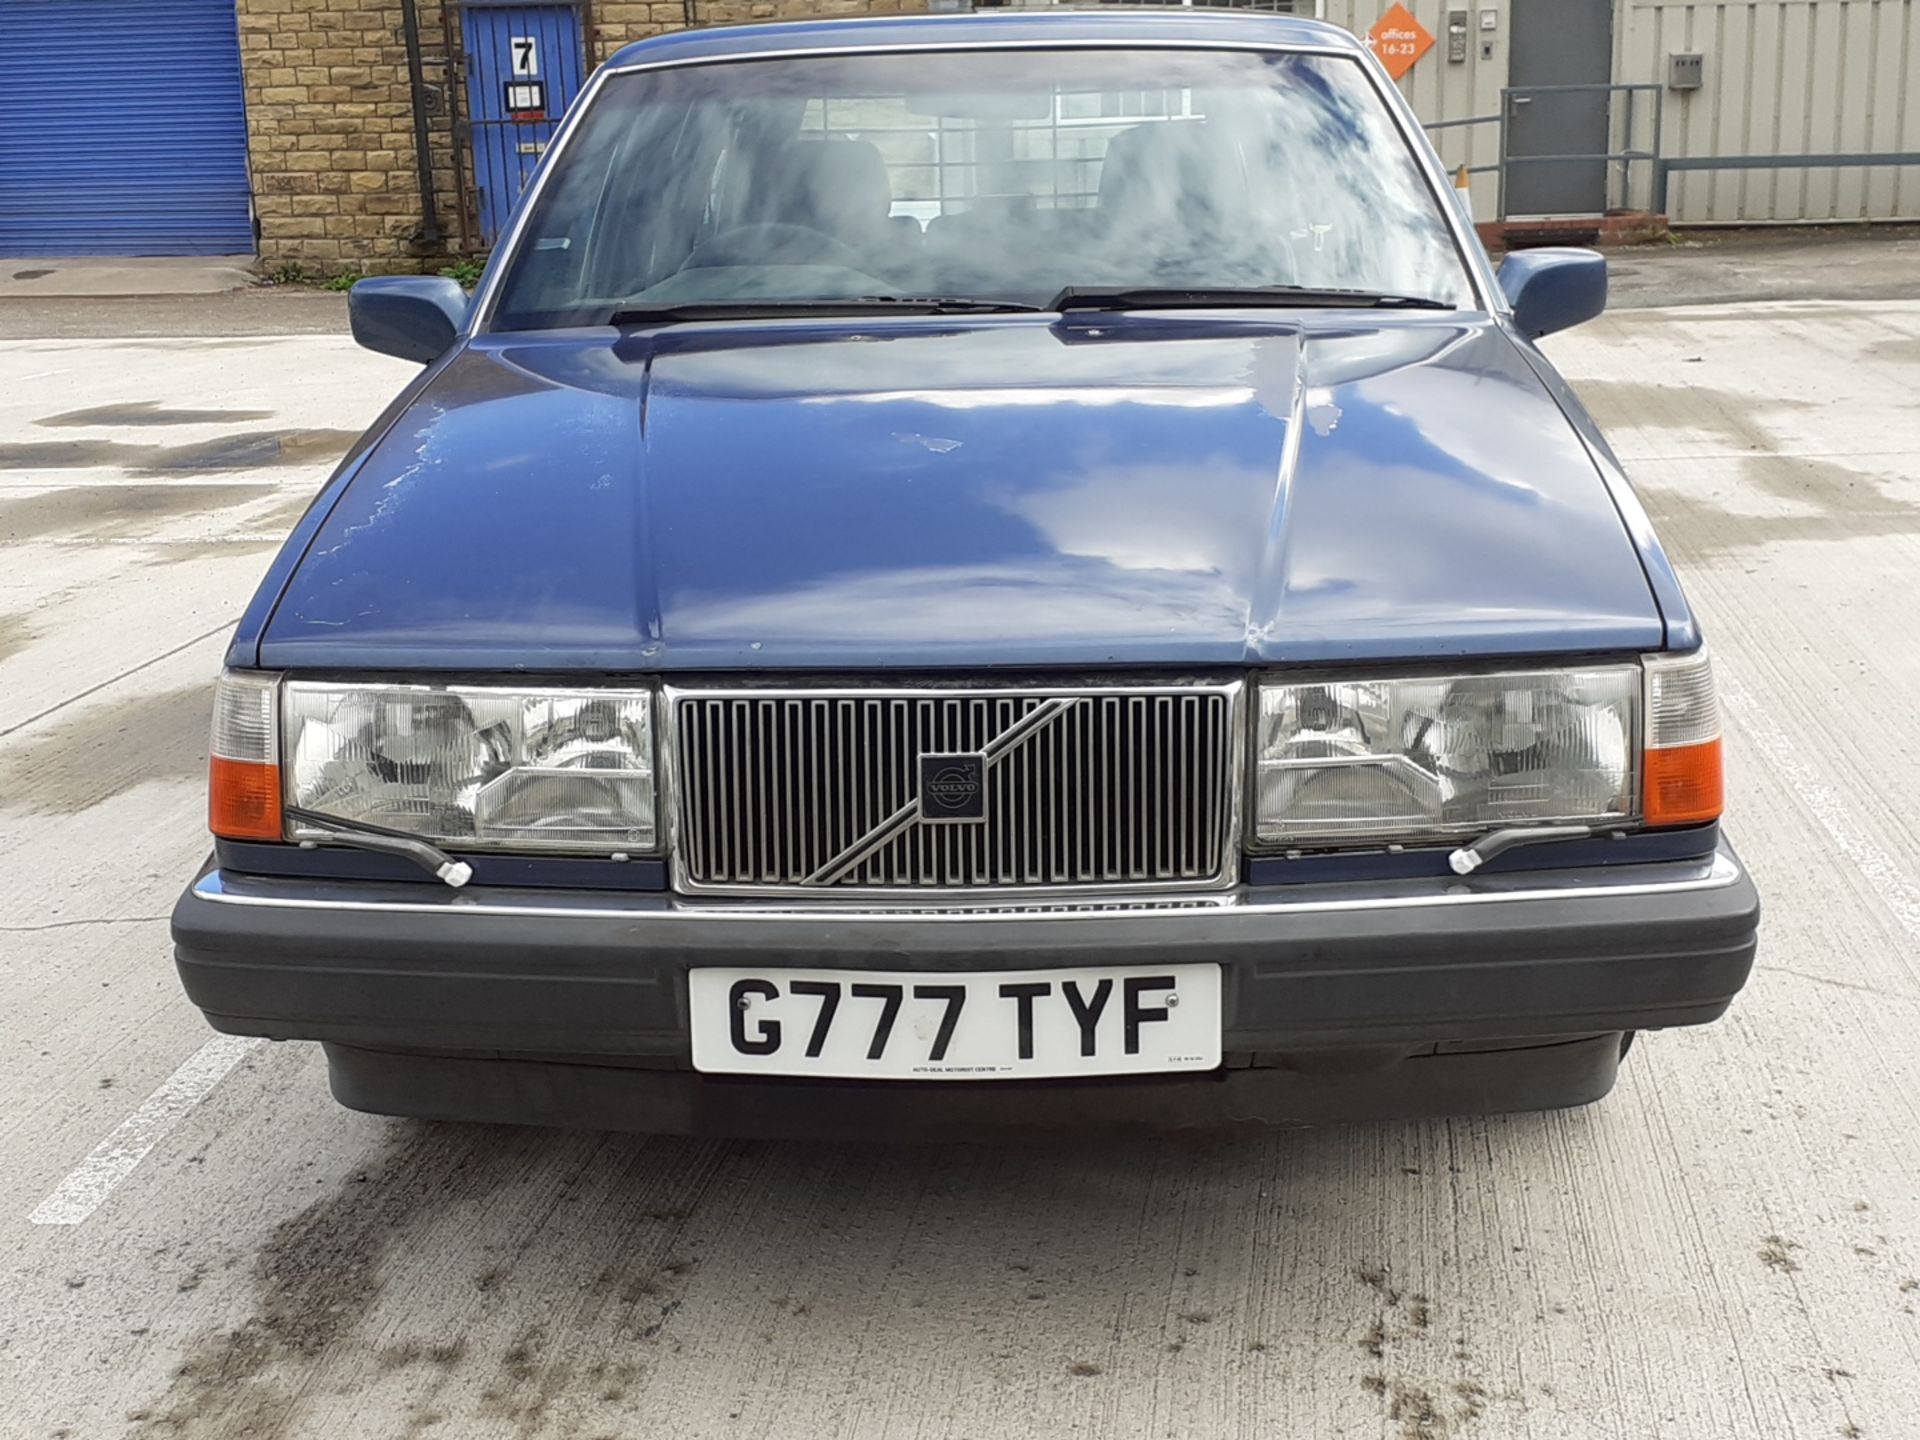 1989/G REG VOLVO 760 TURBO 2.3 PETROL AUTO ESTATE, SHOWING 3 FORMER KEEPERS *NO VAT* - Image 2 of 16